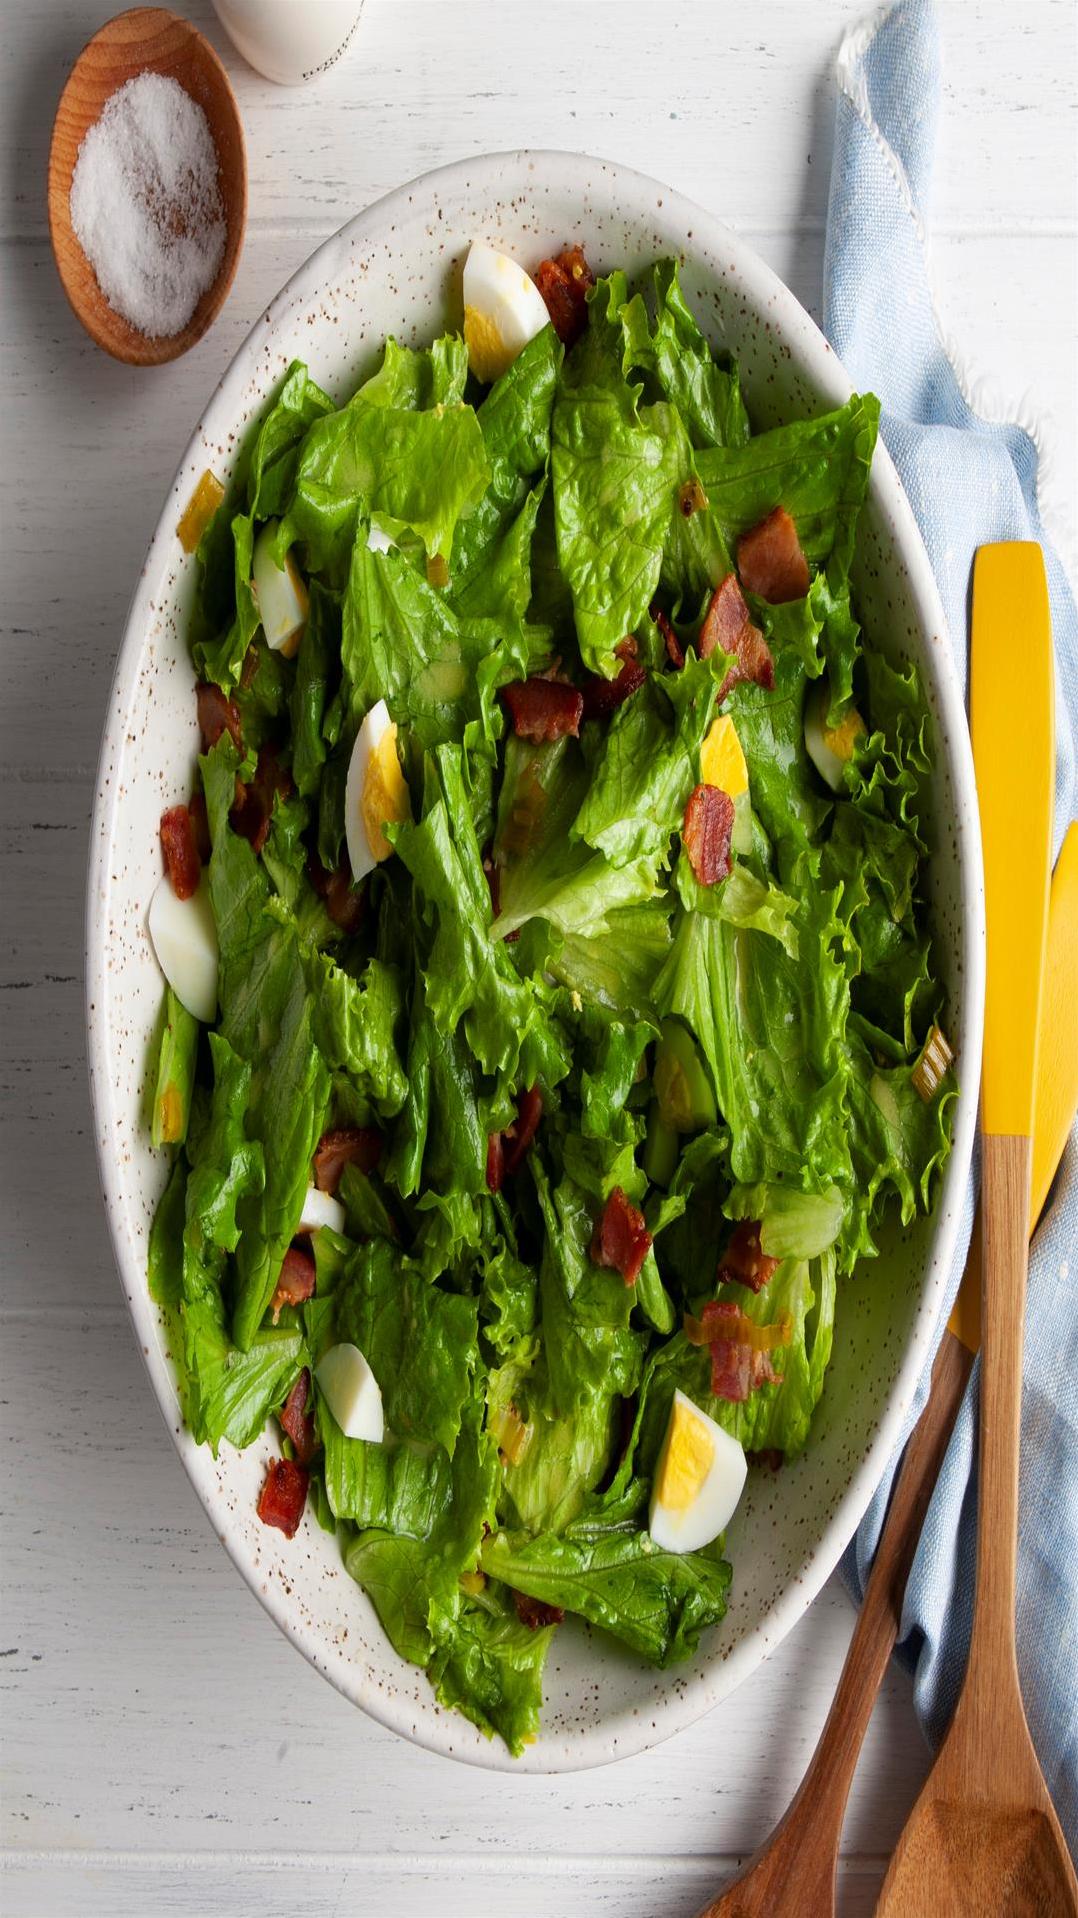  Beautifully seasoned, tangy dressing, adding the perfect amount of umami to the salad.